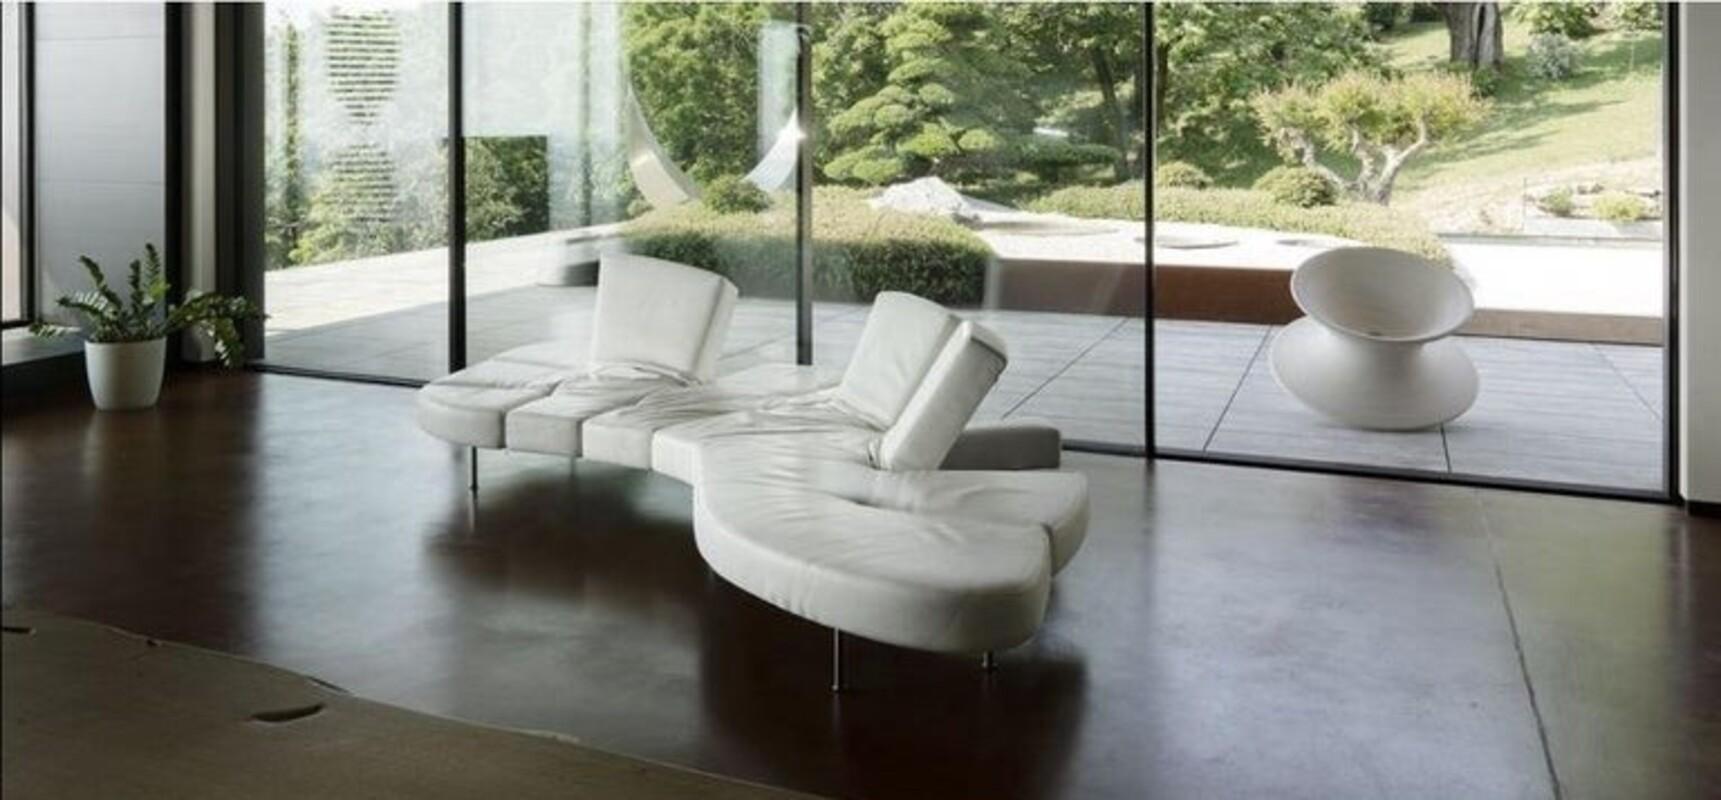 Italian Francesco Binfaré Flap Sofa or Daybed in White Leather by Edra 2000s Italy For Sale